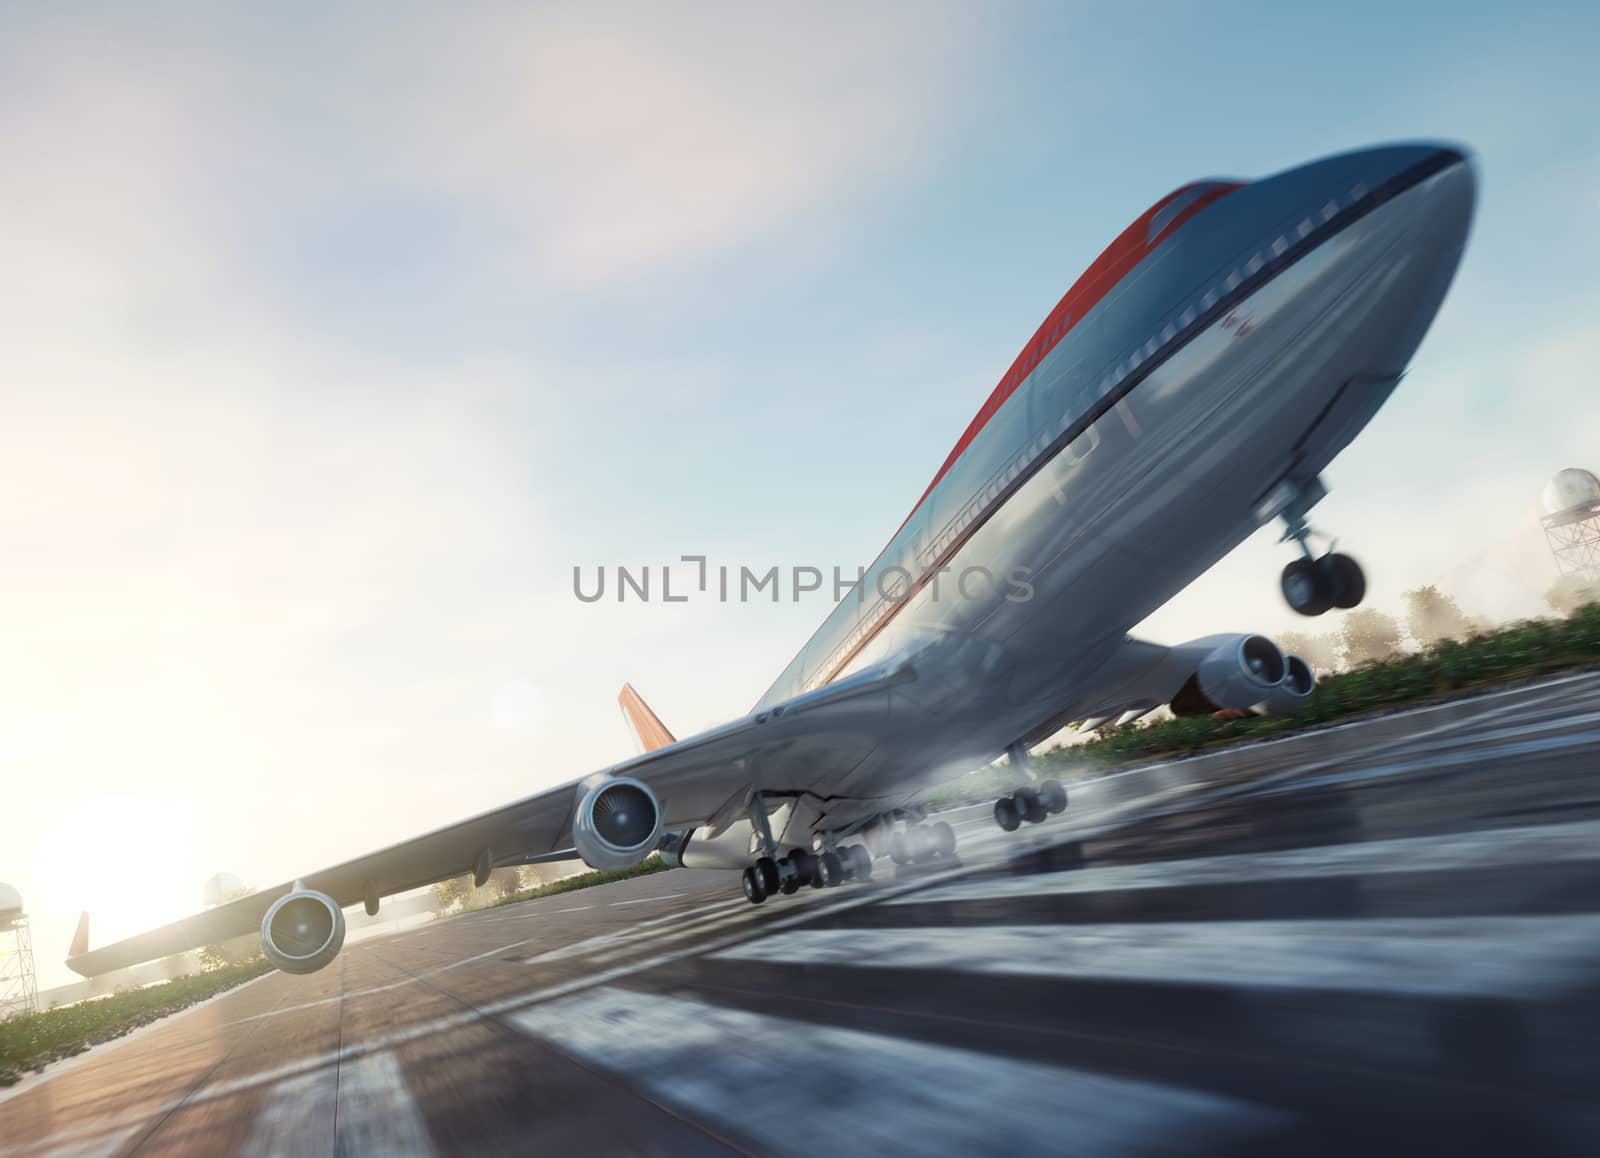 passenger plane take off from runways travel business background concept by denisgo